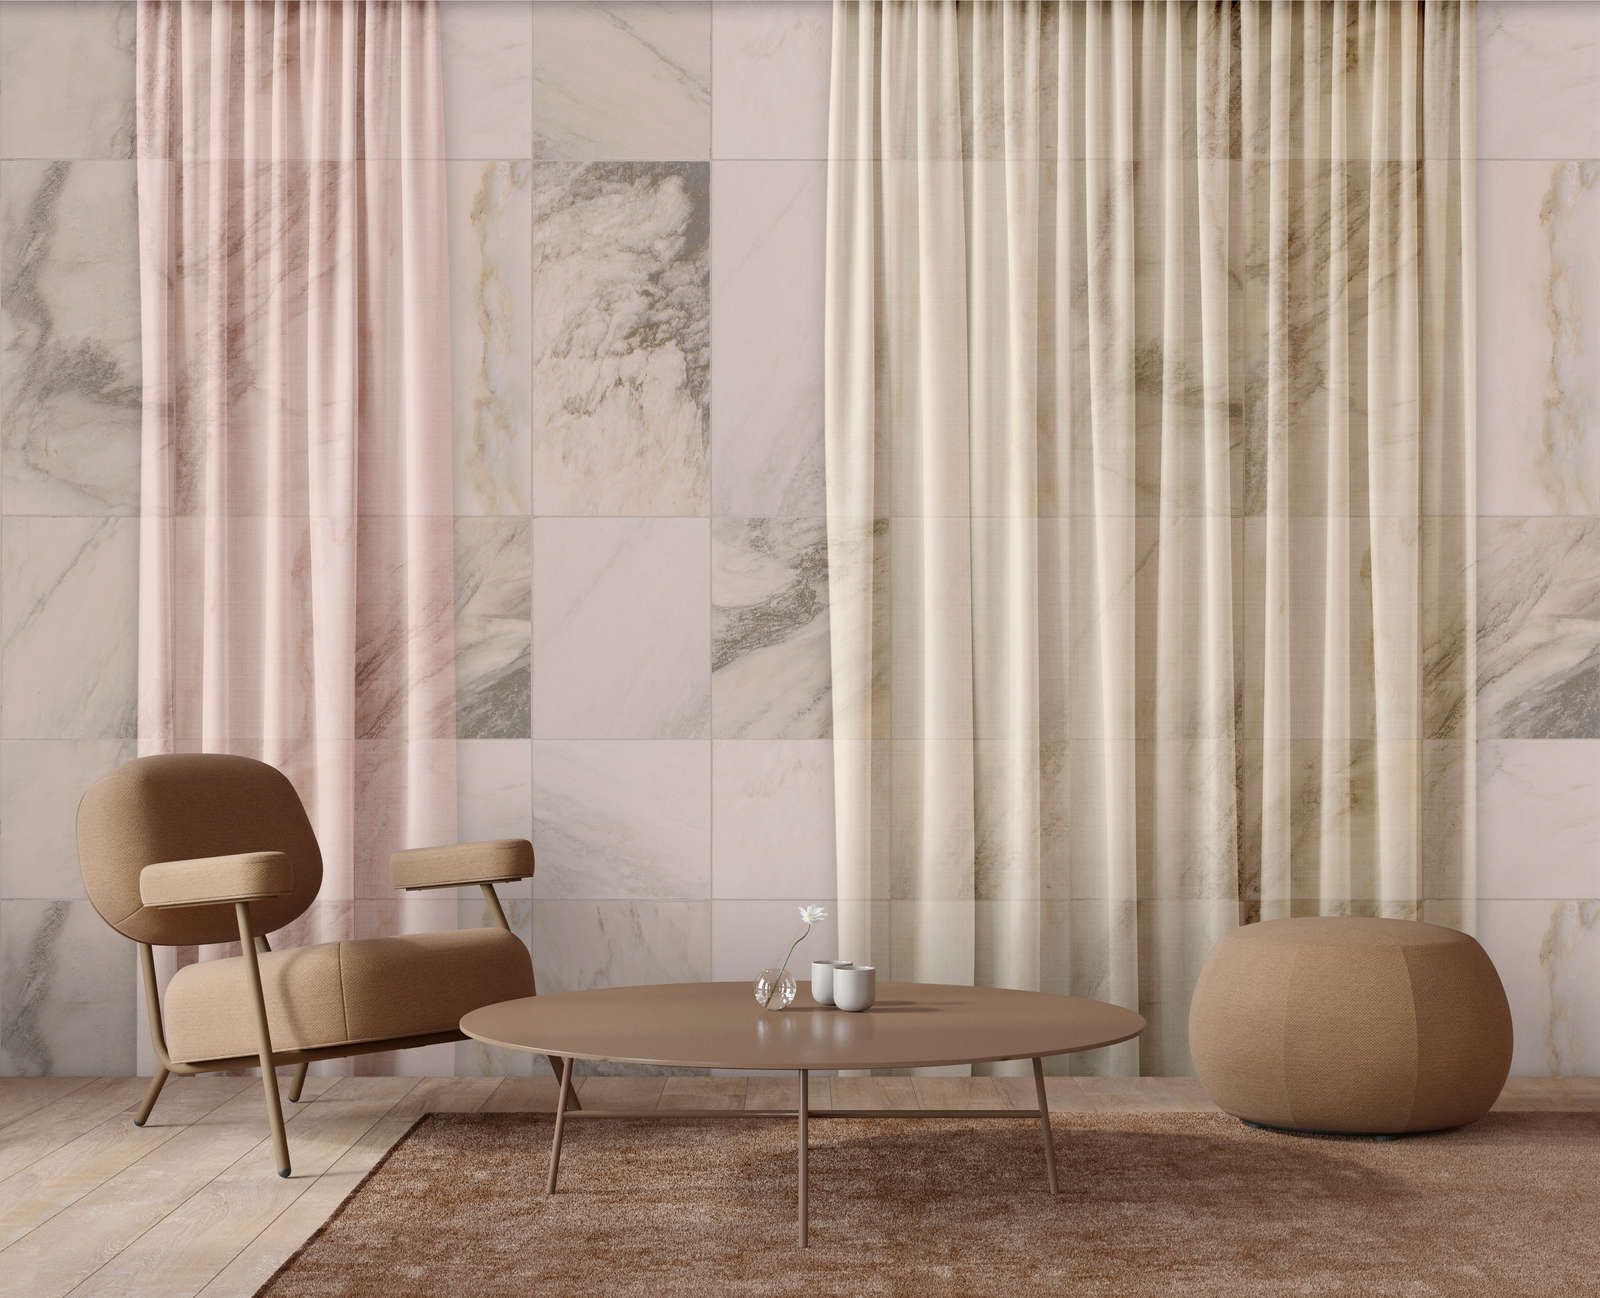             Photo wallpaper »nova 3« - Subtly falling curtains against a beige marble wall - Smooth, slightly pearlescent non-woven fabric
        